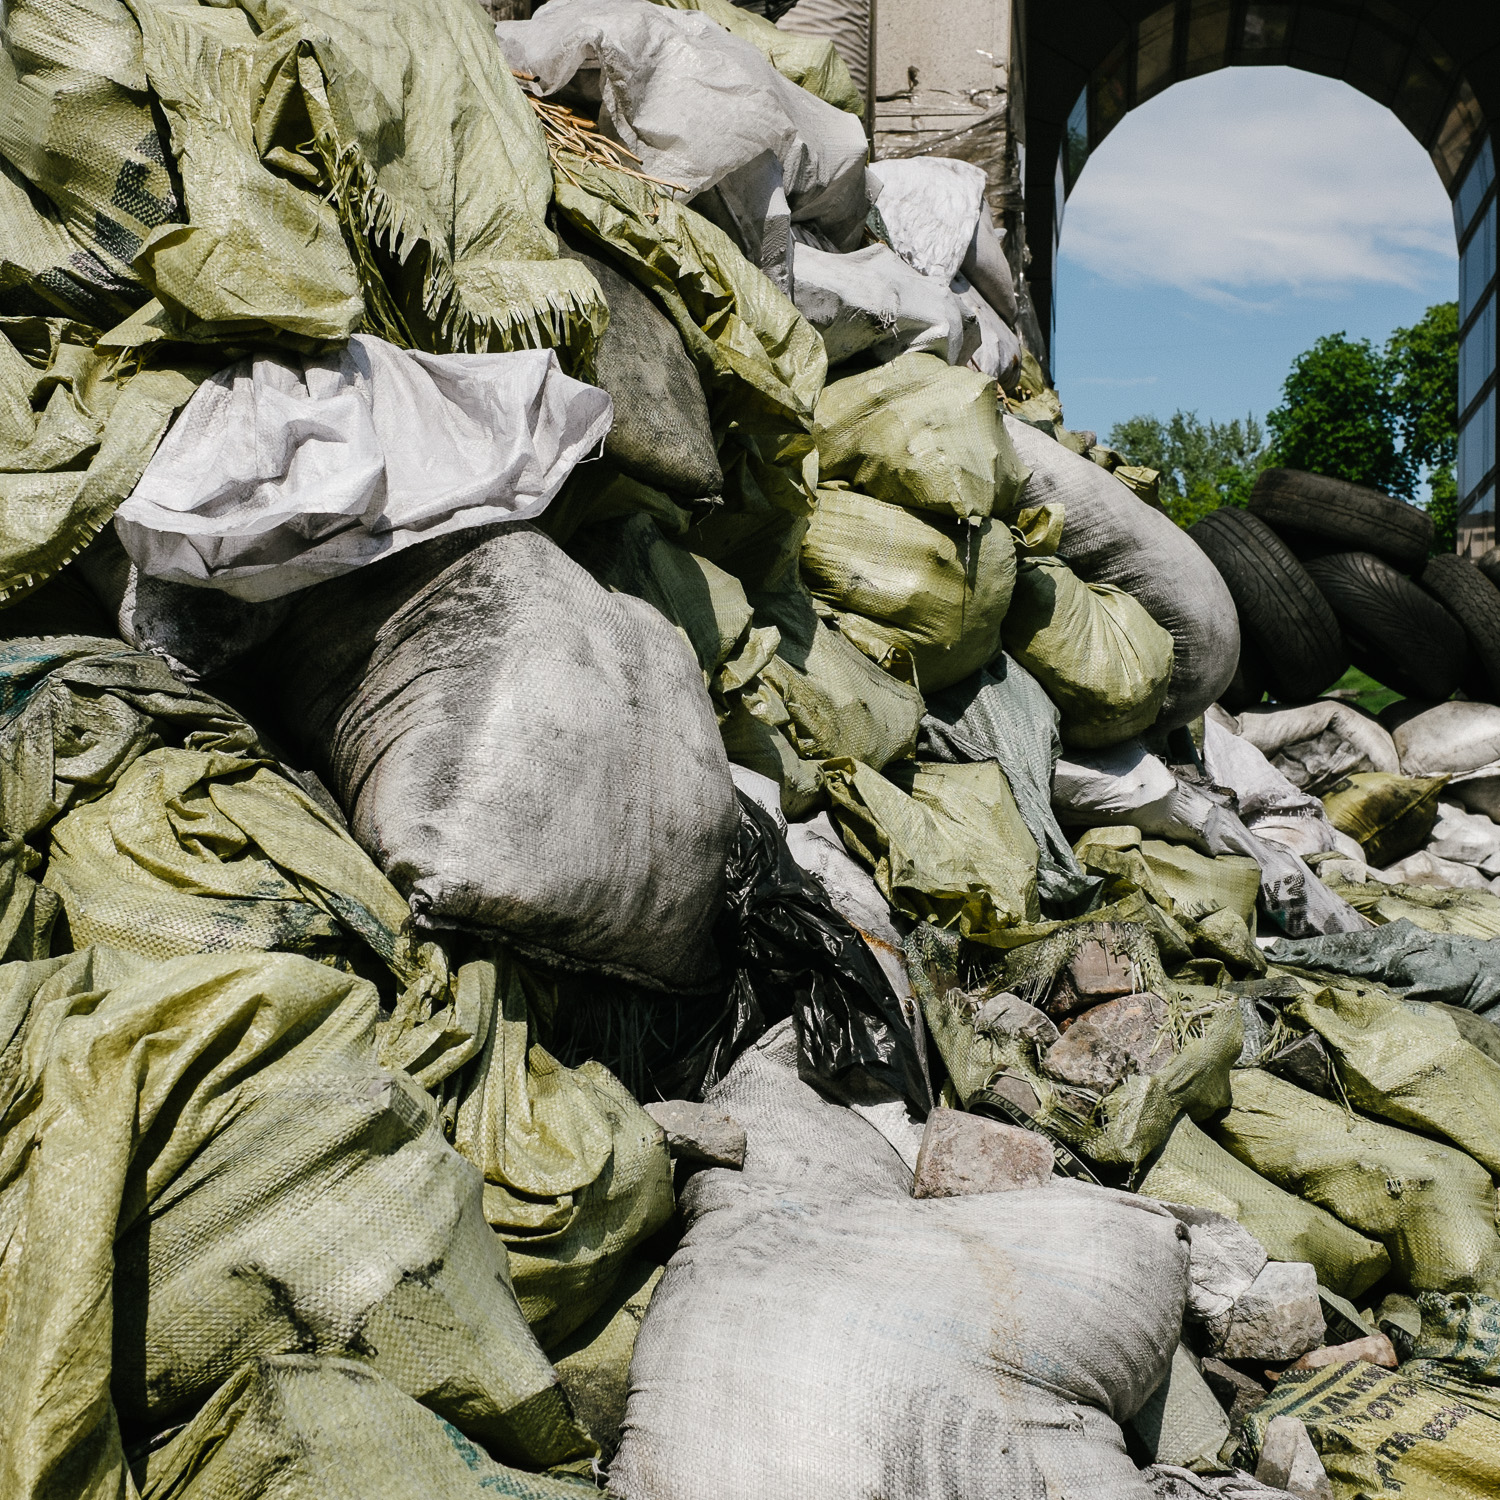  Sandbags piled in Kyiv's Independence Square, April 2014. 